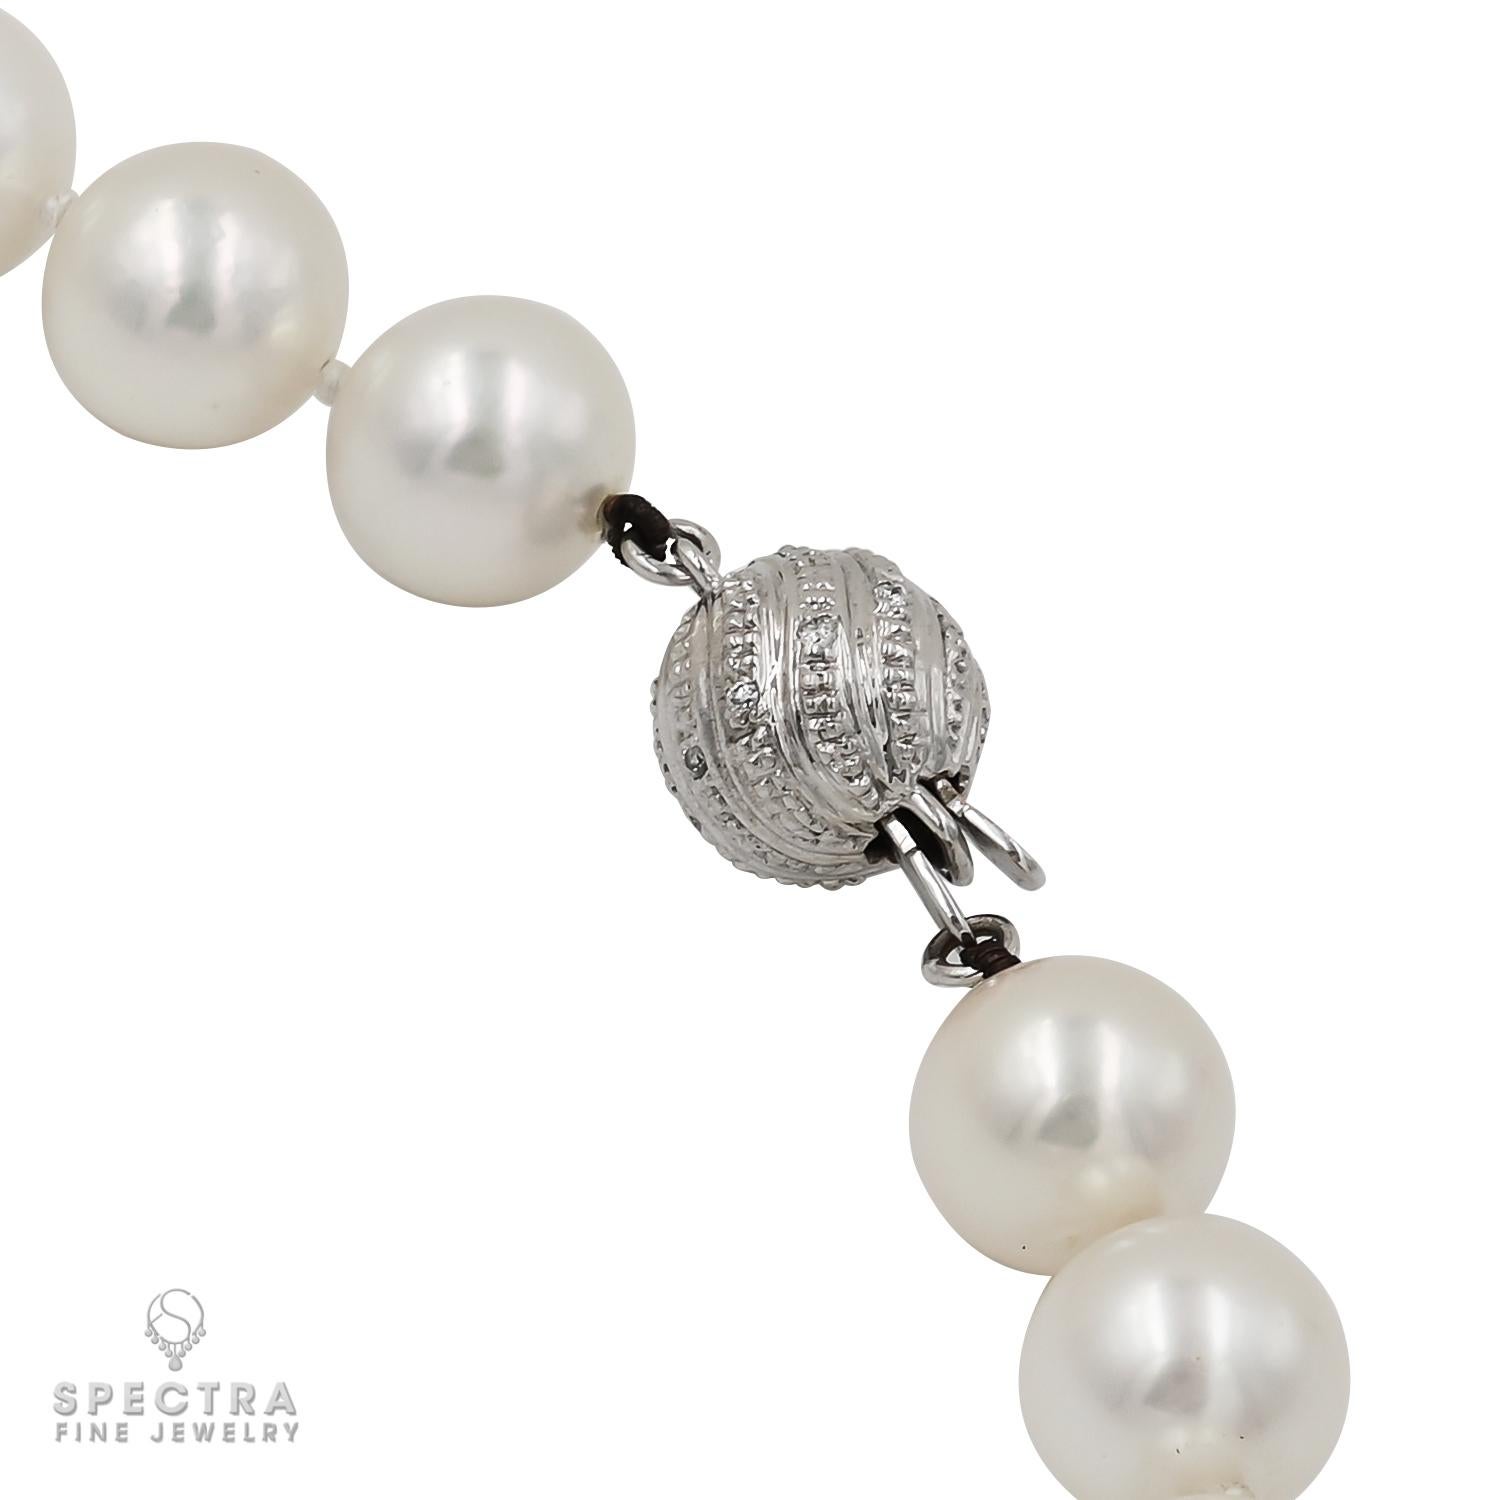 This exquisite South Sea Pearl Bead Necklace is crafted with attention to detail, boasting 45 lustrous pearls. Each pearl measures 9mm in diameter, showcasing the luxurious beauty of South Sea pearls.

Secured with a sophisticated 14k white gold